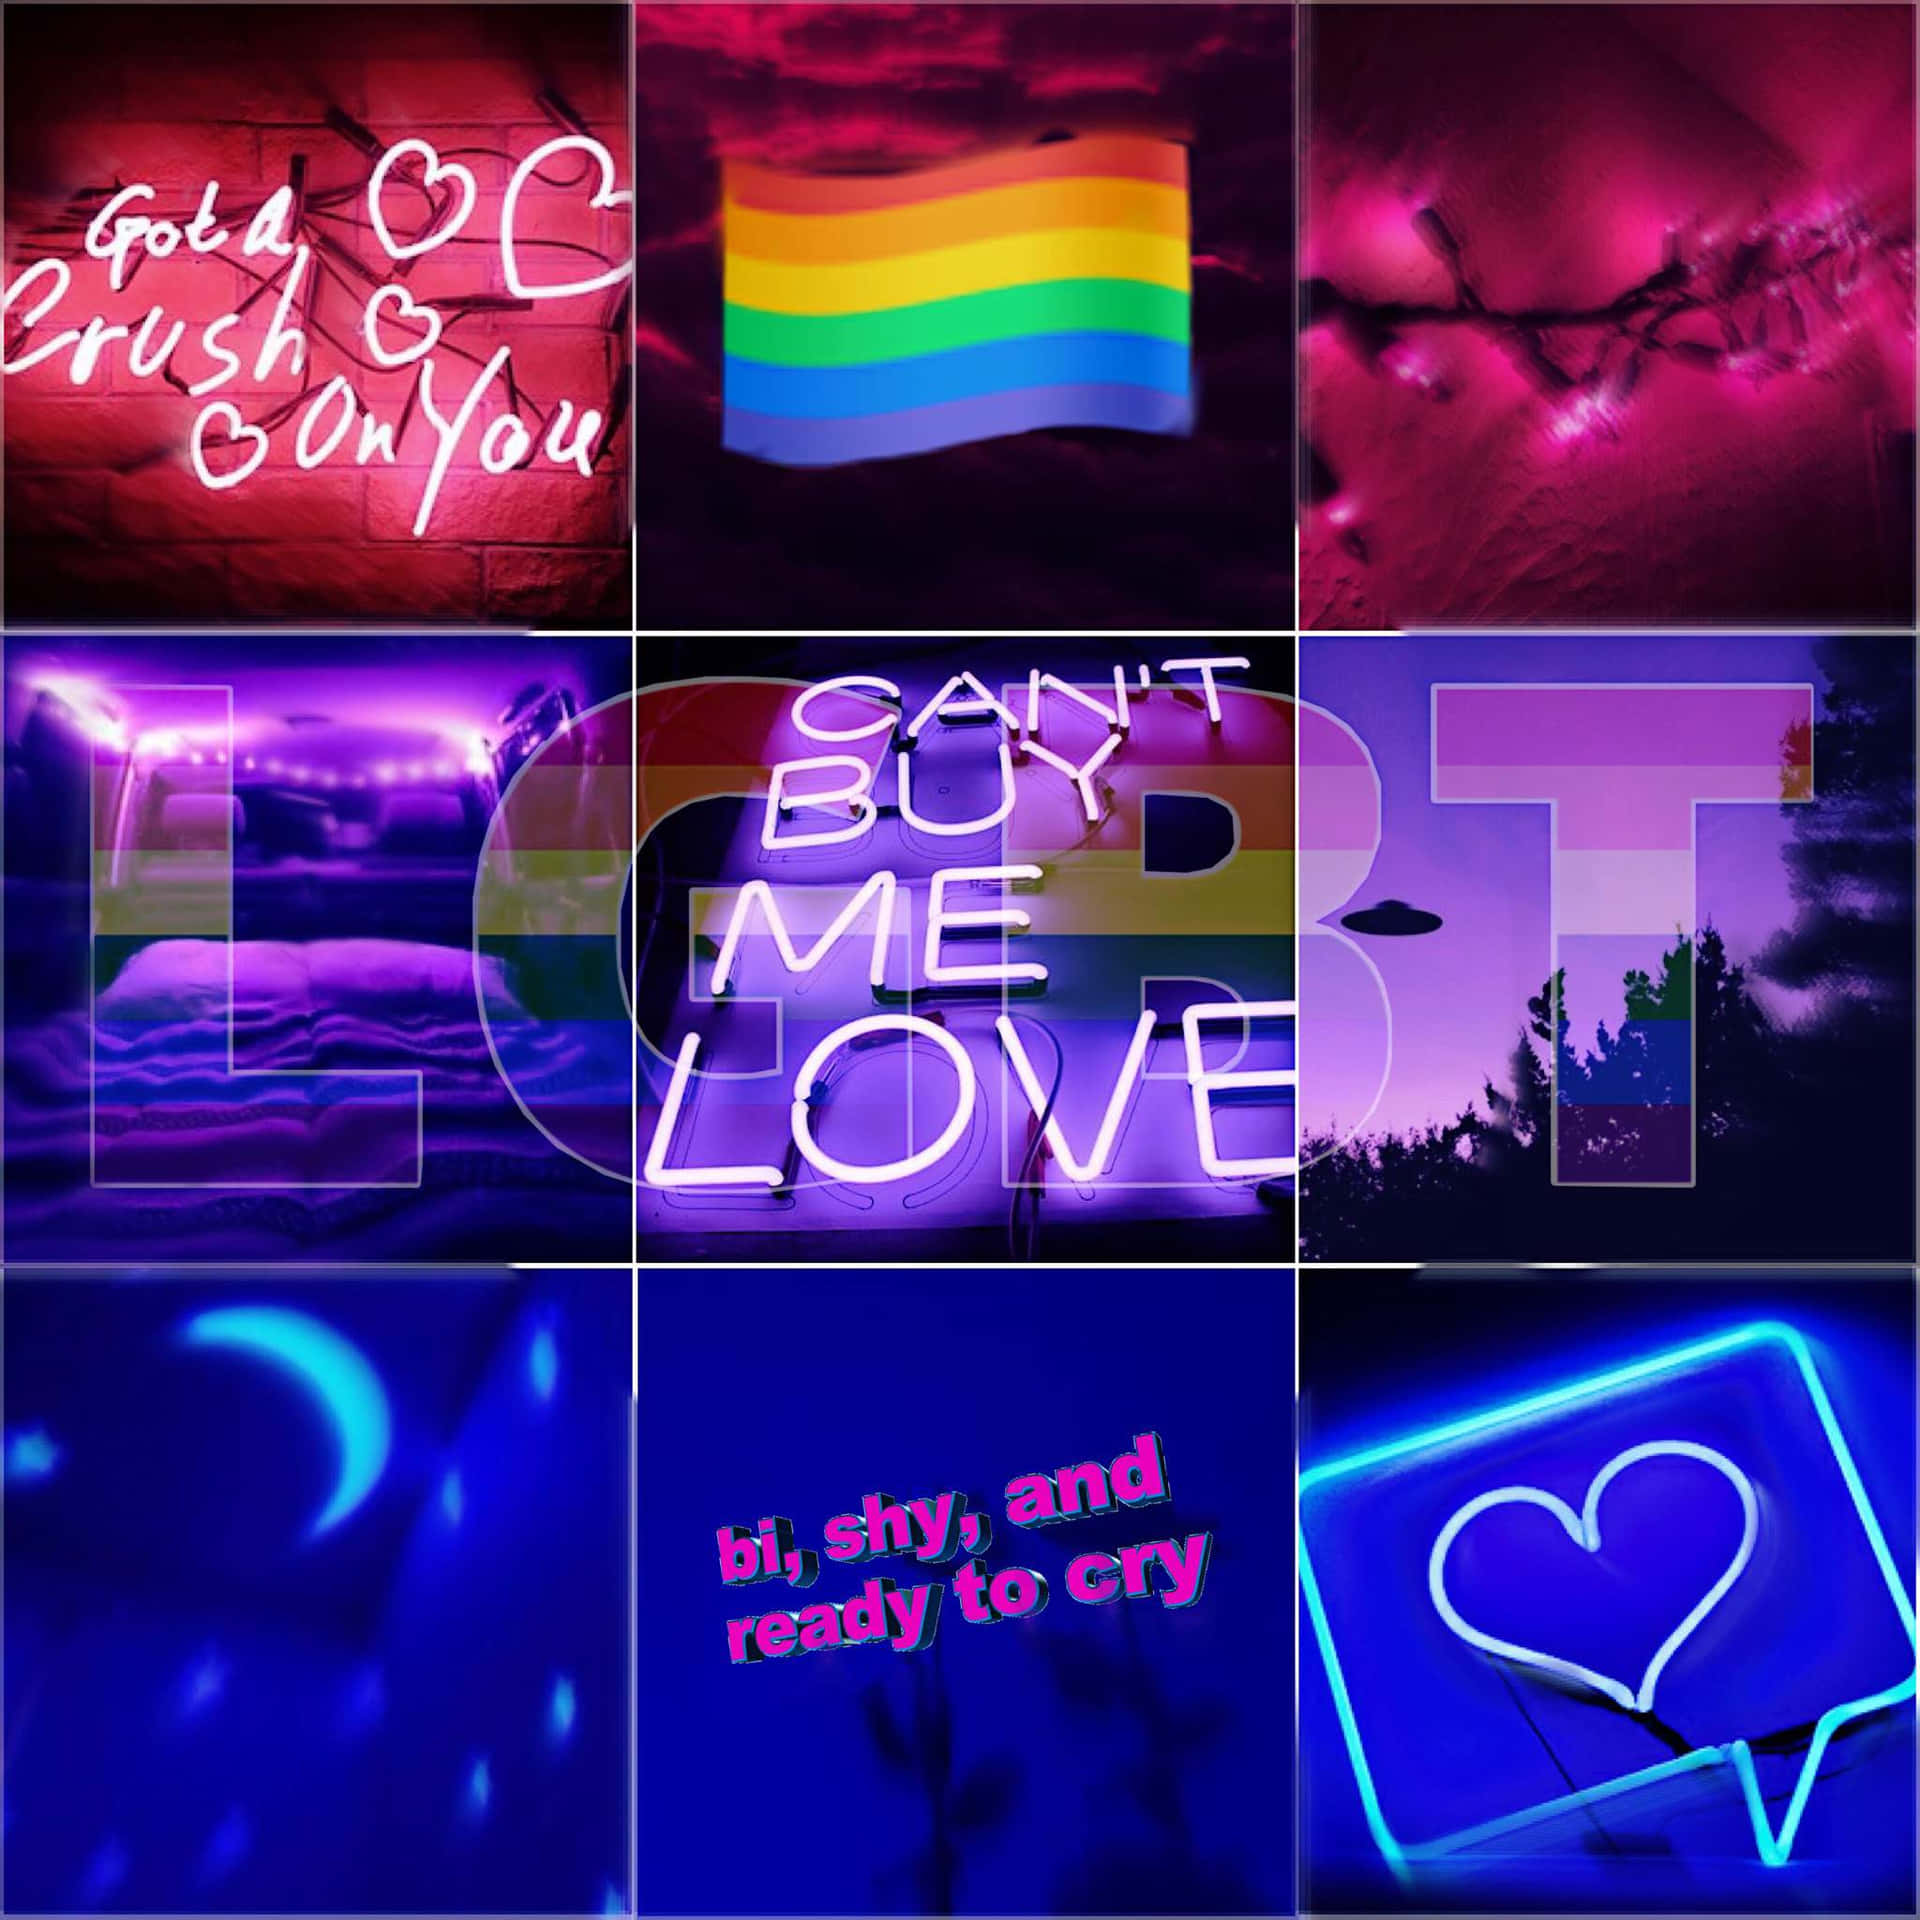 Bisexual Themed Love Collage Wallpaper